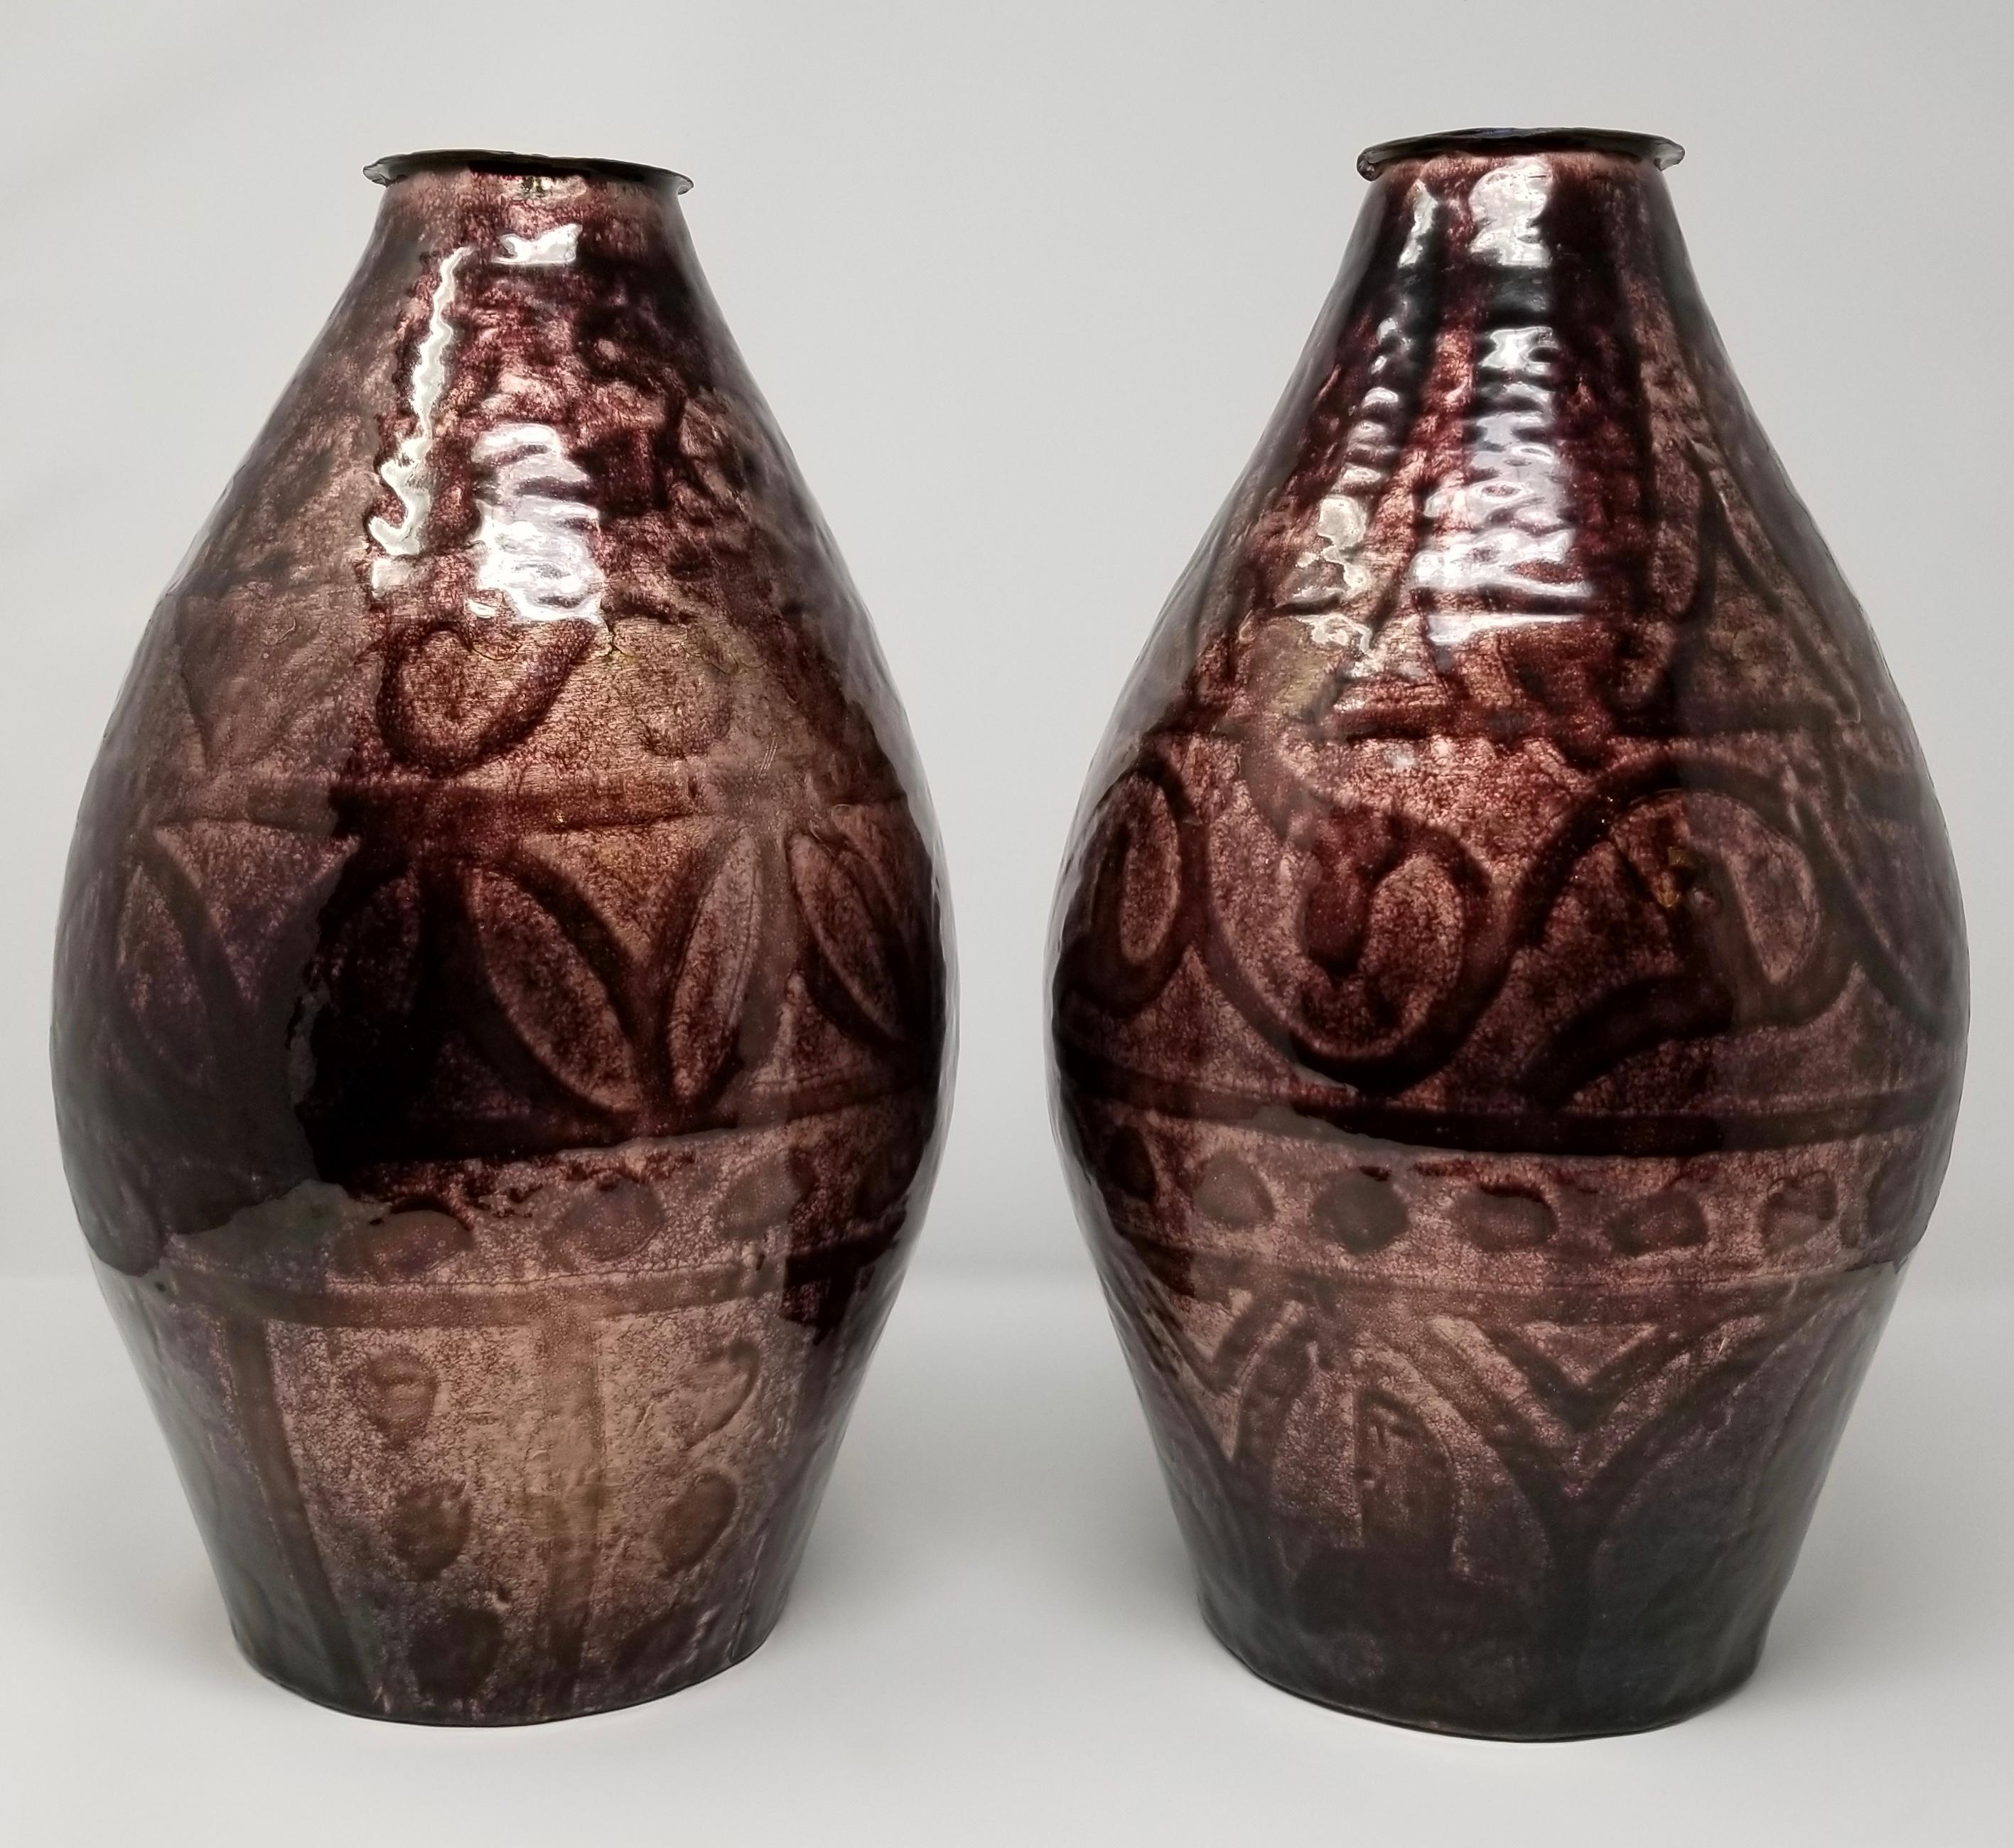 A fabulous pair of large antique French Art Deco period purple enamel on copper vases with Iridescent Geometric designs, attributed to Camille Faure. This beautiful pair of vases have a unique color-way with mixed iridescent purple and red hues and